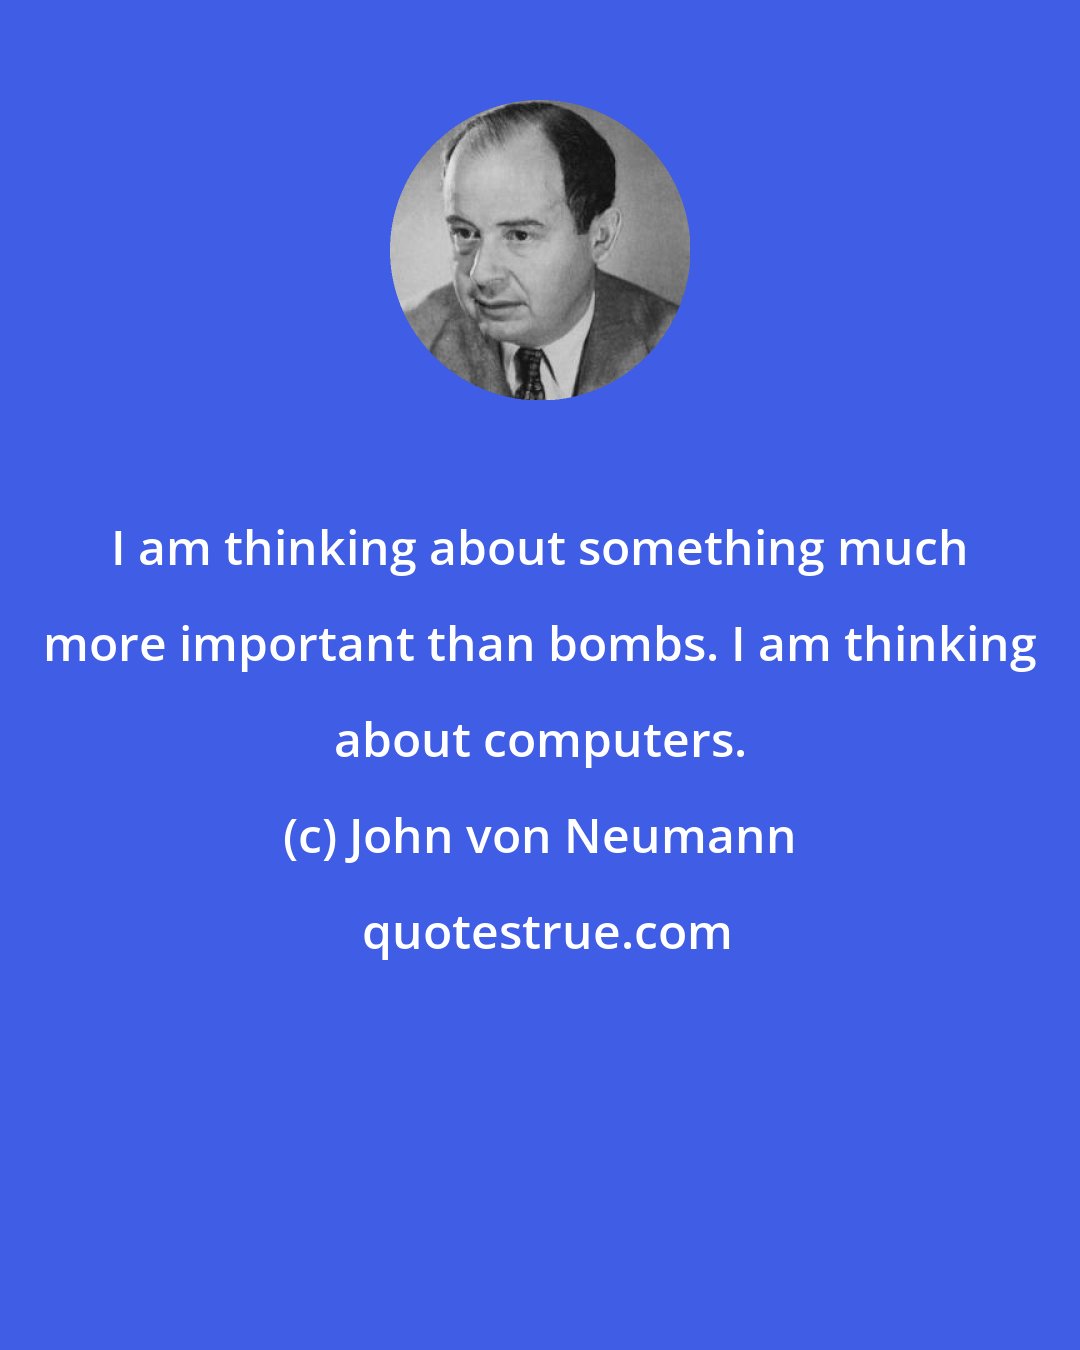 John von Neumann: I am thinking about something much more important than bombs. I am thinking about computers.